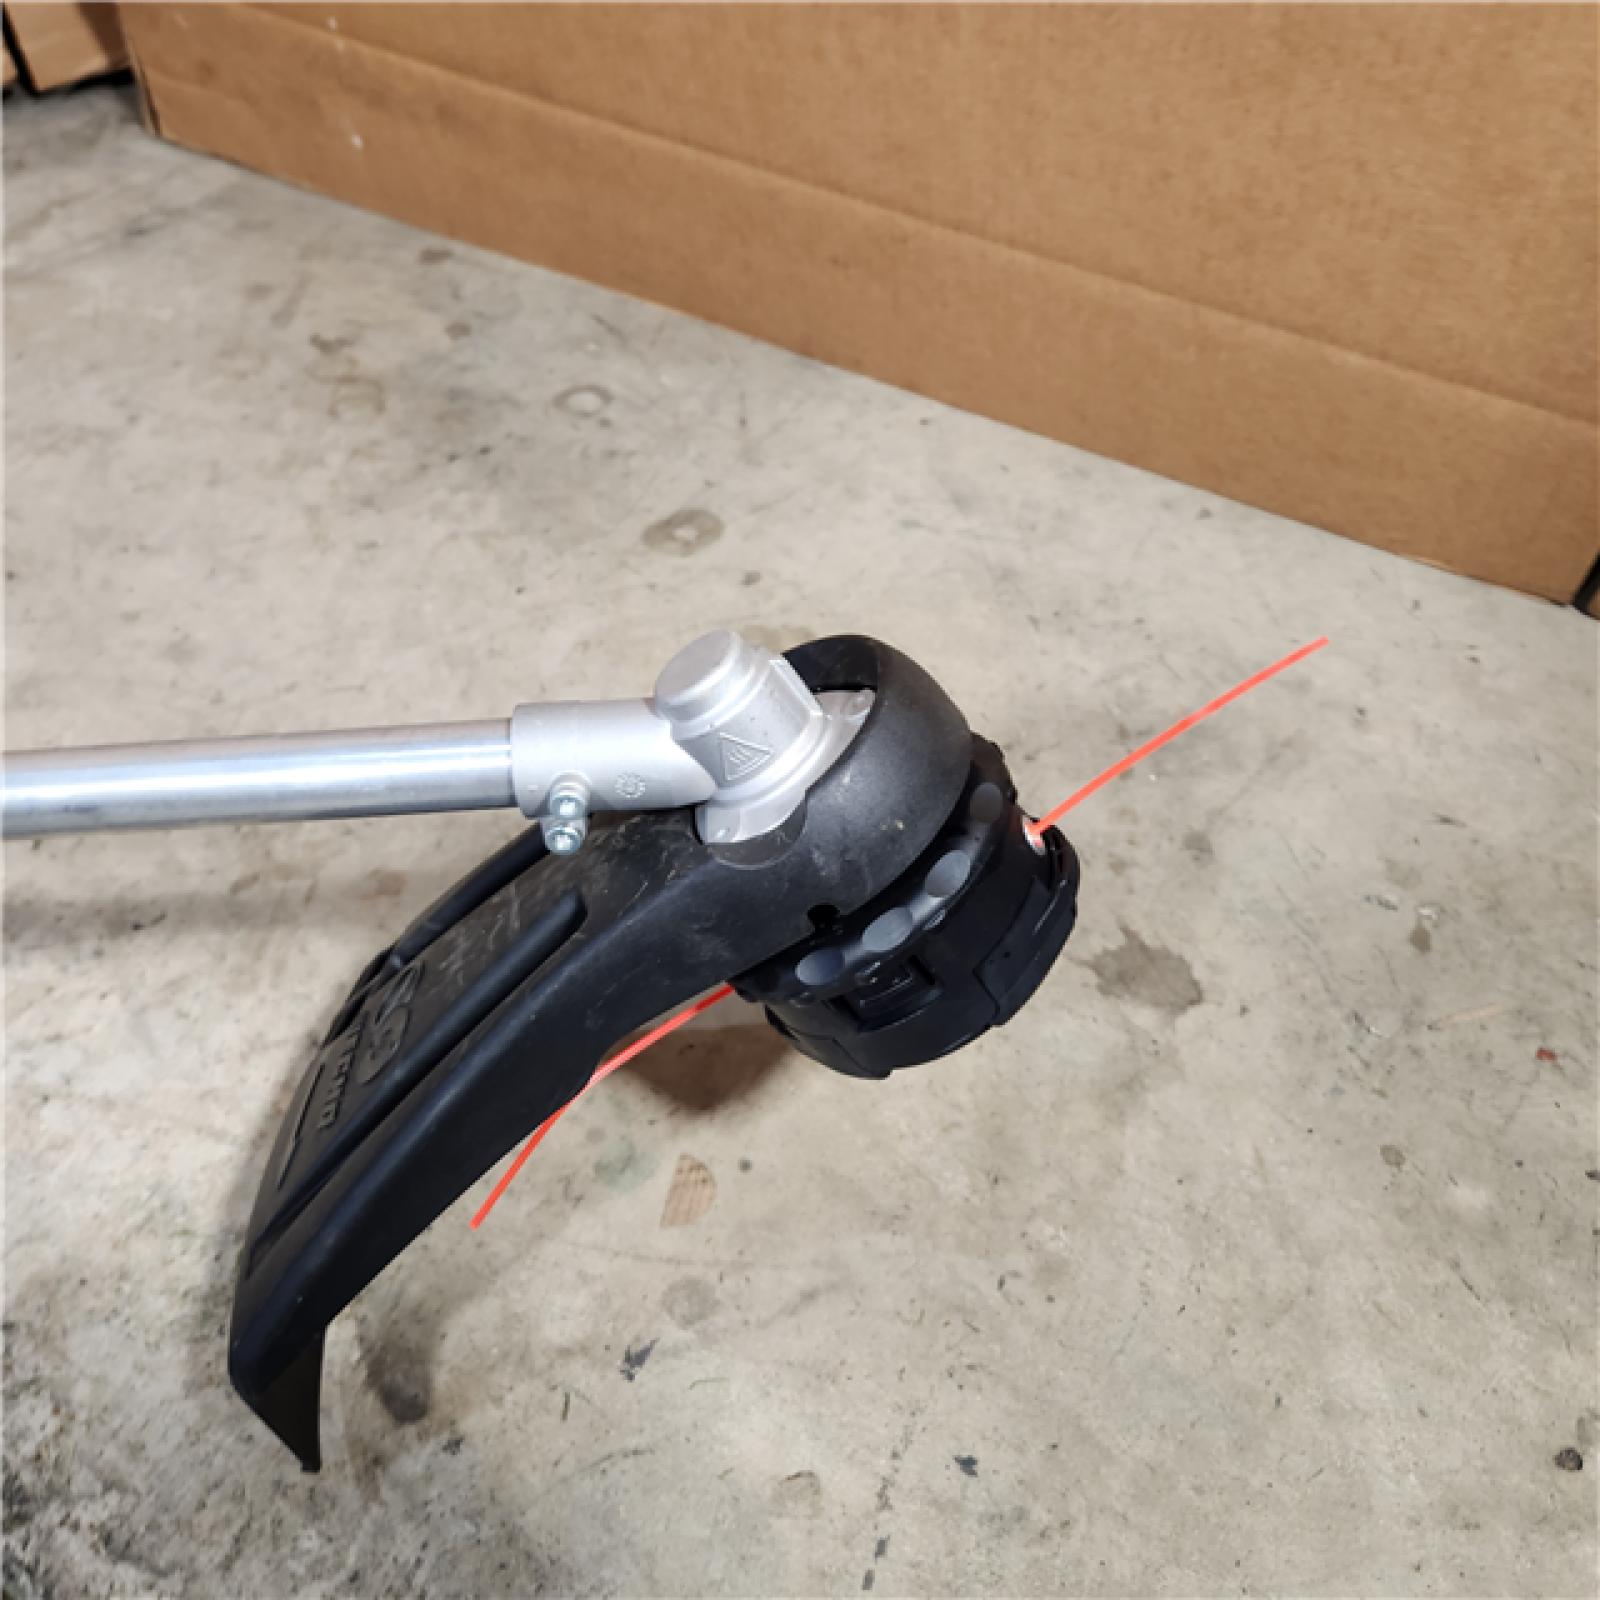 Houston Location - AS-IS Echo PAS-225 21.2cc 2-Stroke Cycle Gas PAS Straight Shaft Trimmer Edger Kit - Appears IN GOOD Condition